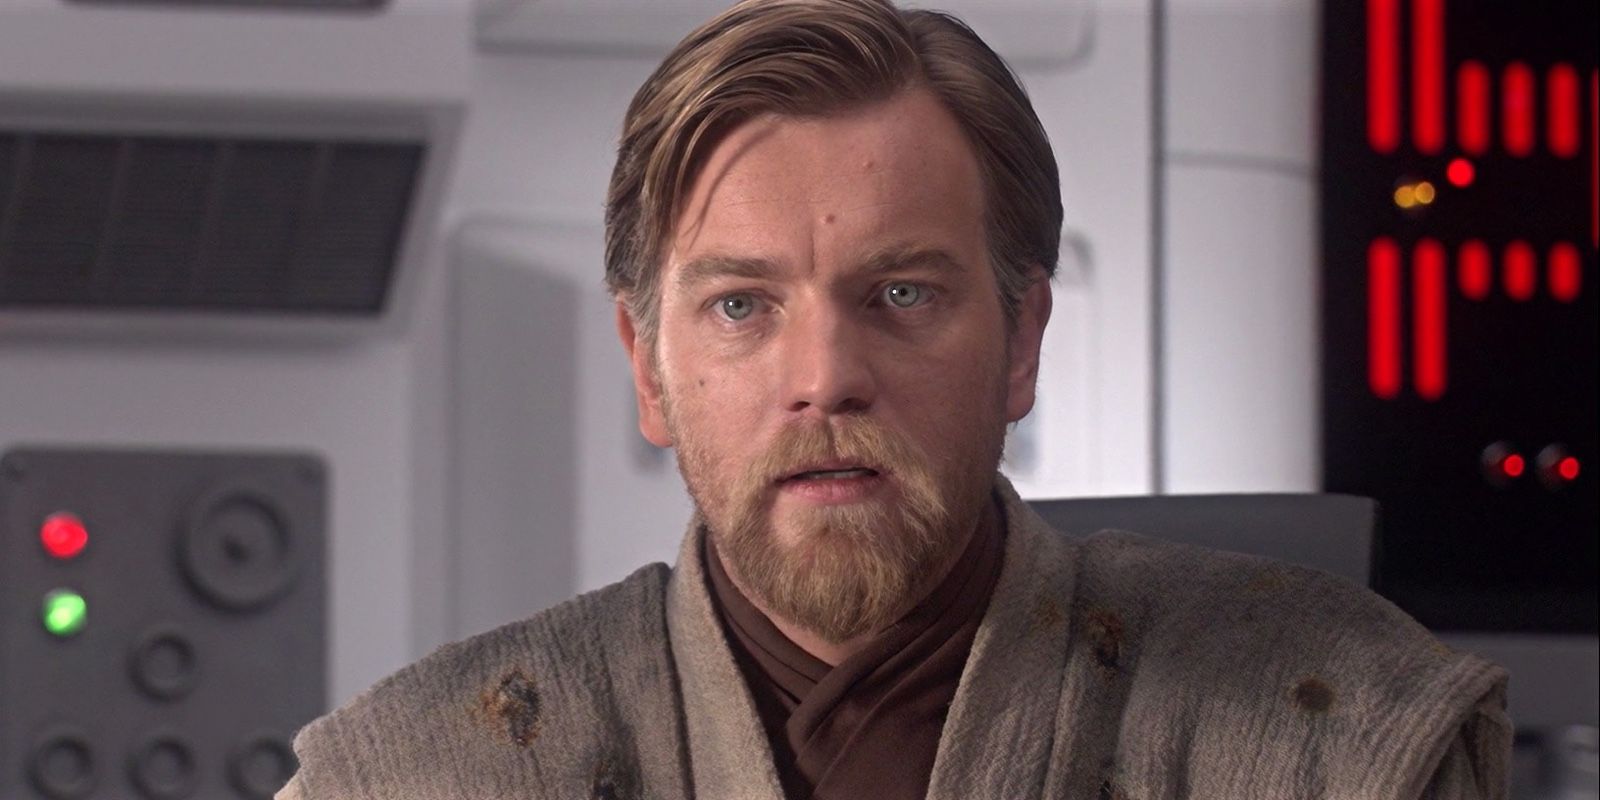 I Have The Higher Ground 10 Funniest ObiWan Kenobi Quotes